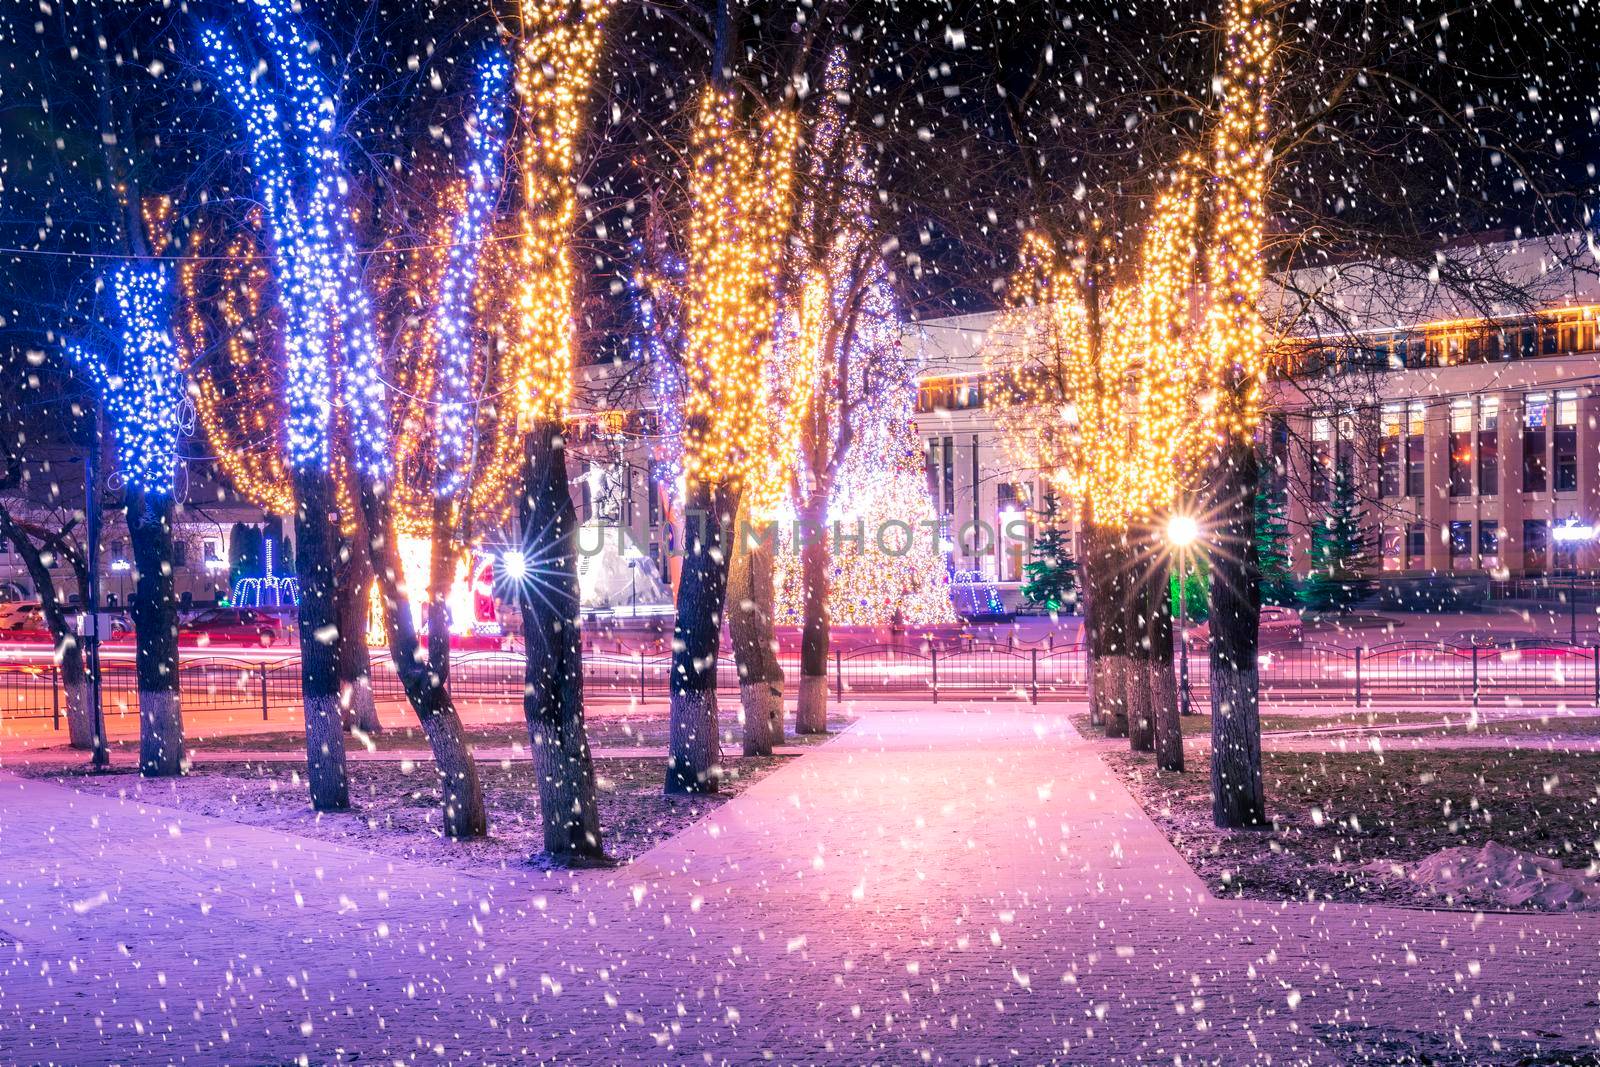 Snowfall in a winter park at night with christmas decorations, lights, pavement covered with snow and trees with garlands.